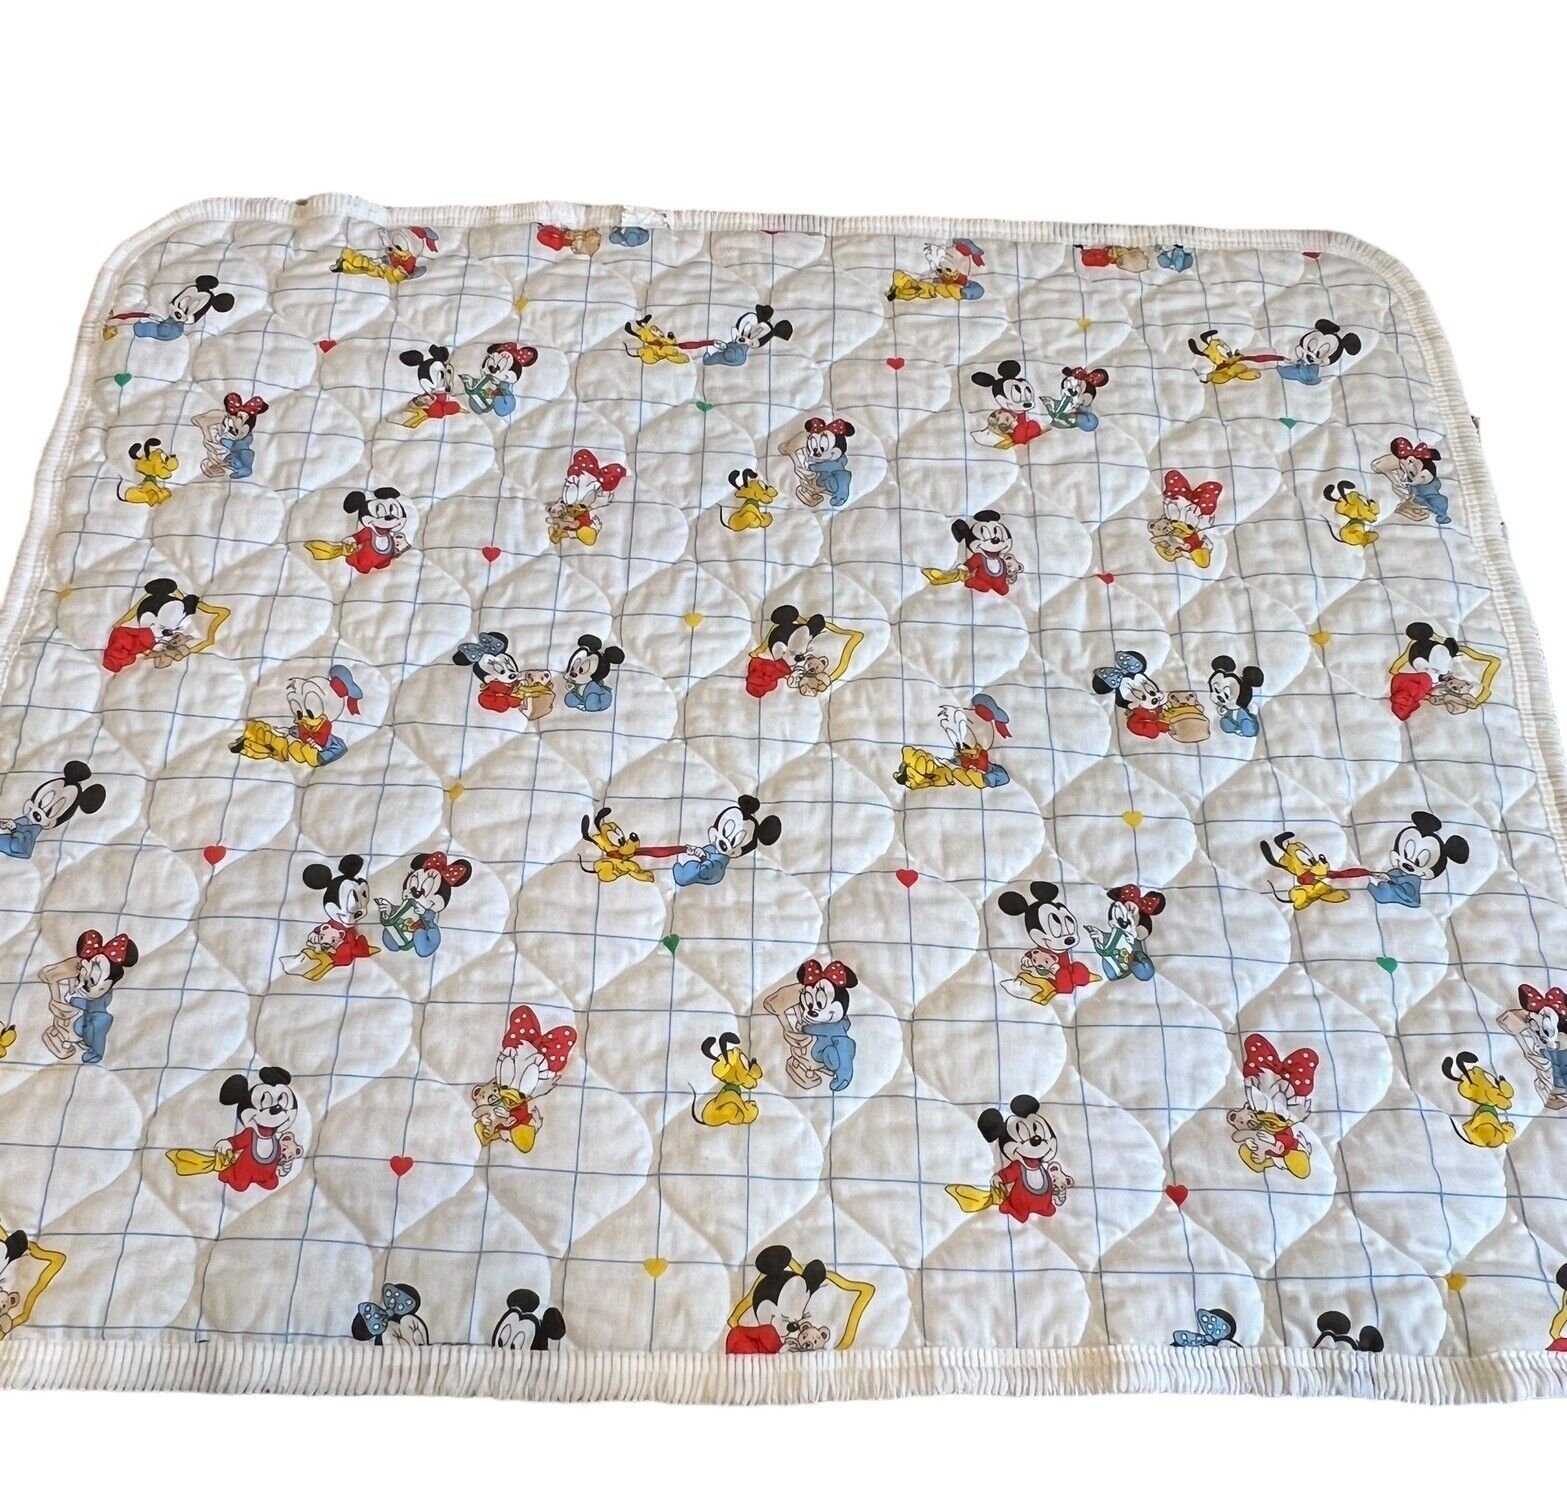 Vintage Dundee Disney Baby Quilted Crib Blanket Minnie Mickey Mouse Donald Daisy